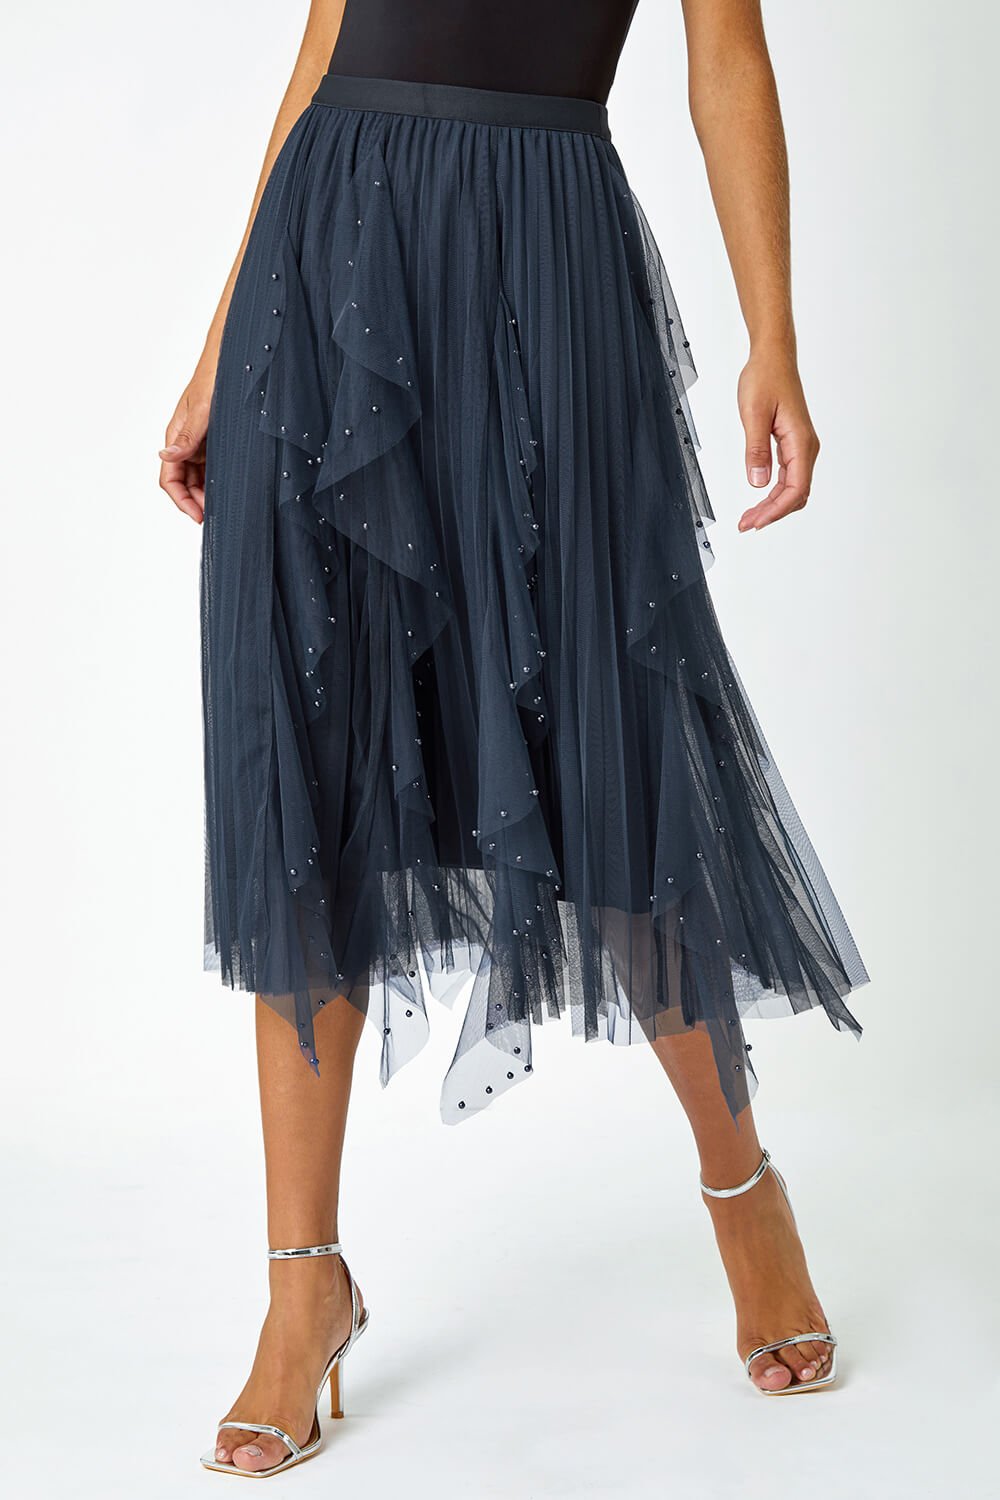 Midnight Blue Elasticated Pearl Mesh Layered Skirt, Image 2 of 5